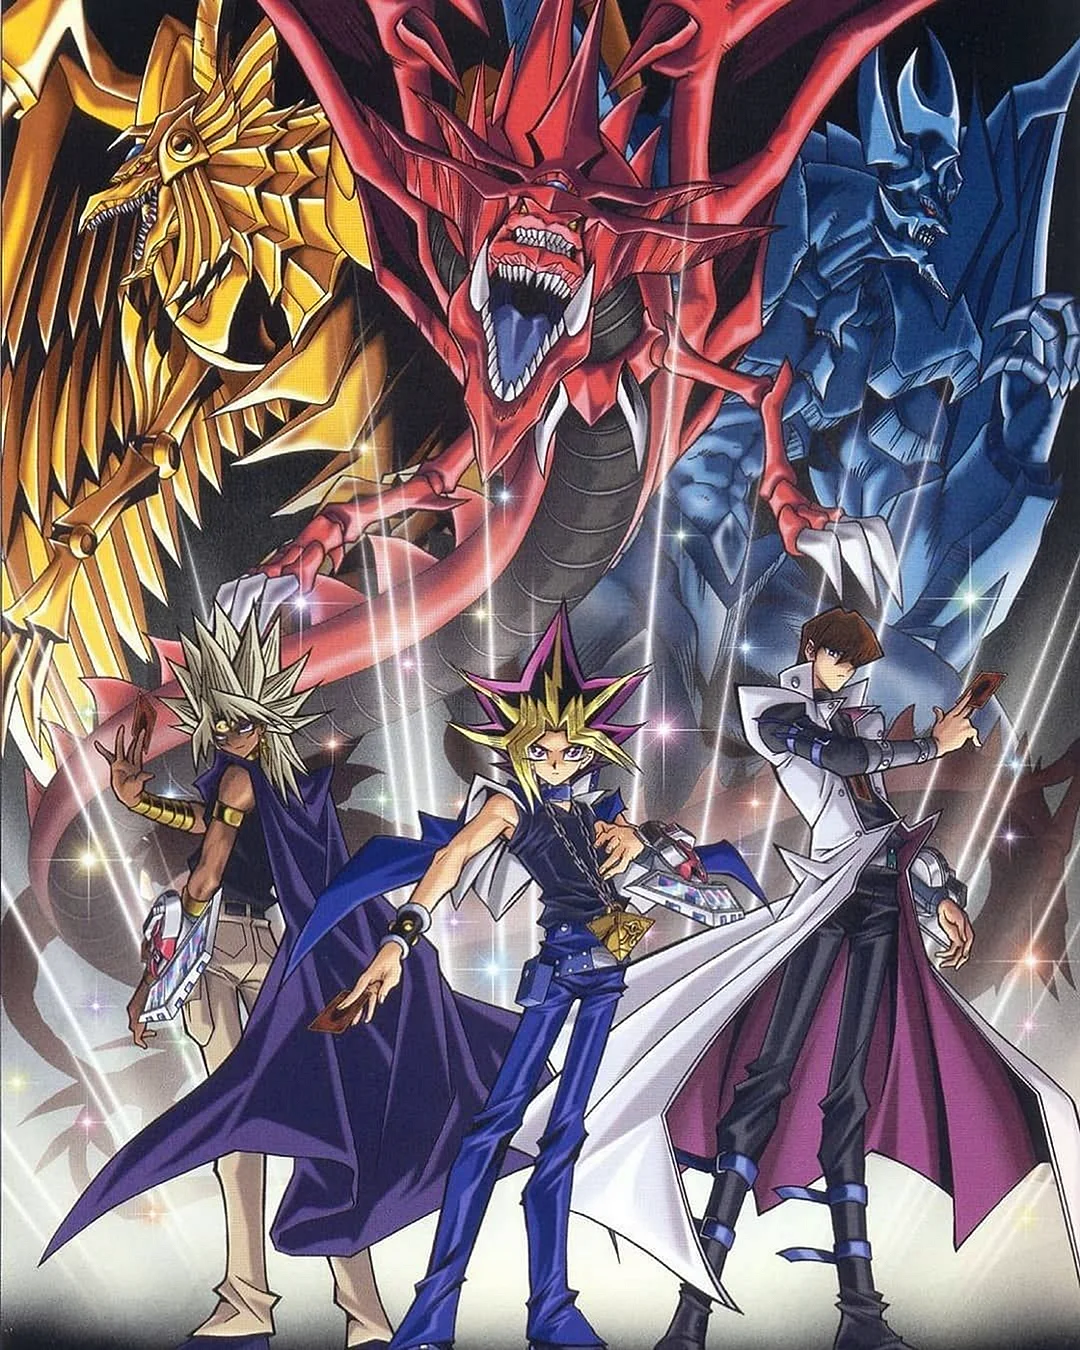 Yu-Gi-Oh Duel Monsters Wallpaper For iPhone